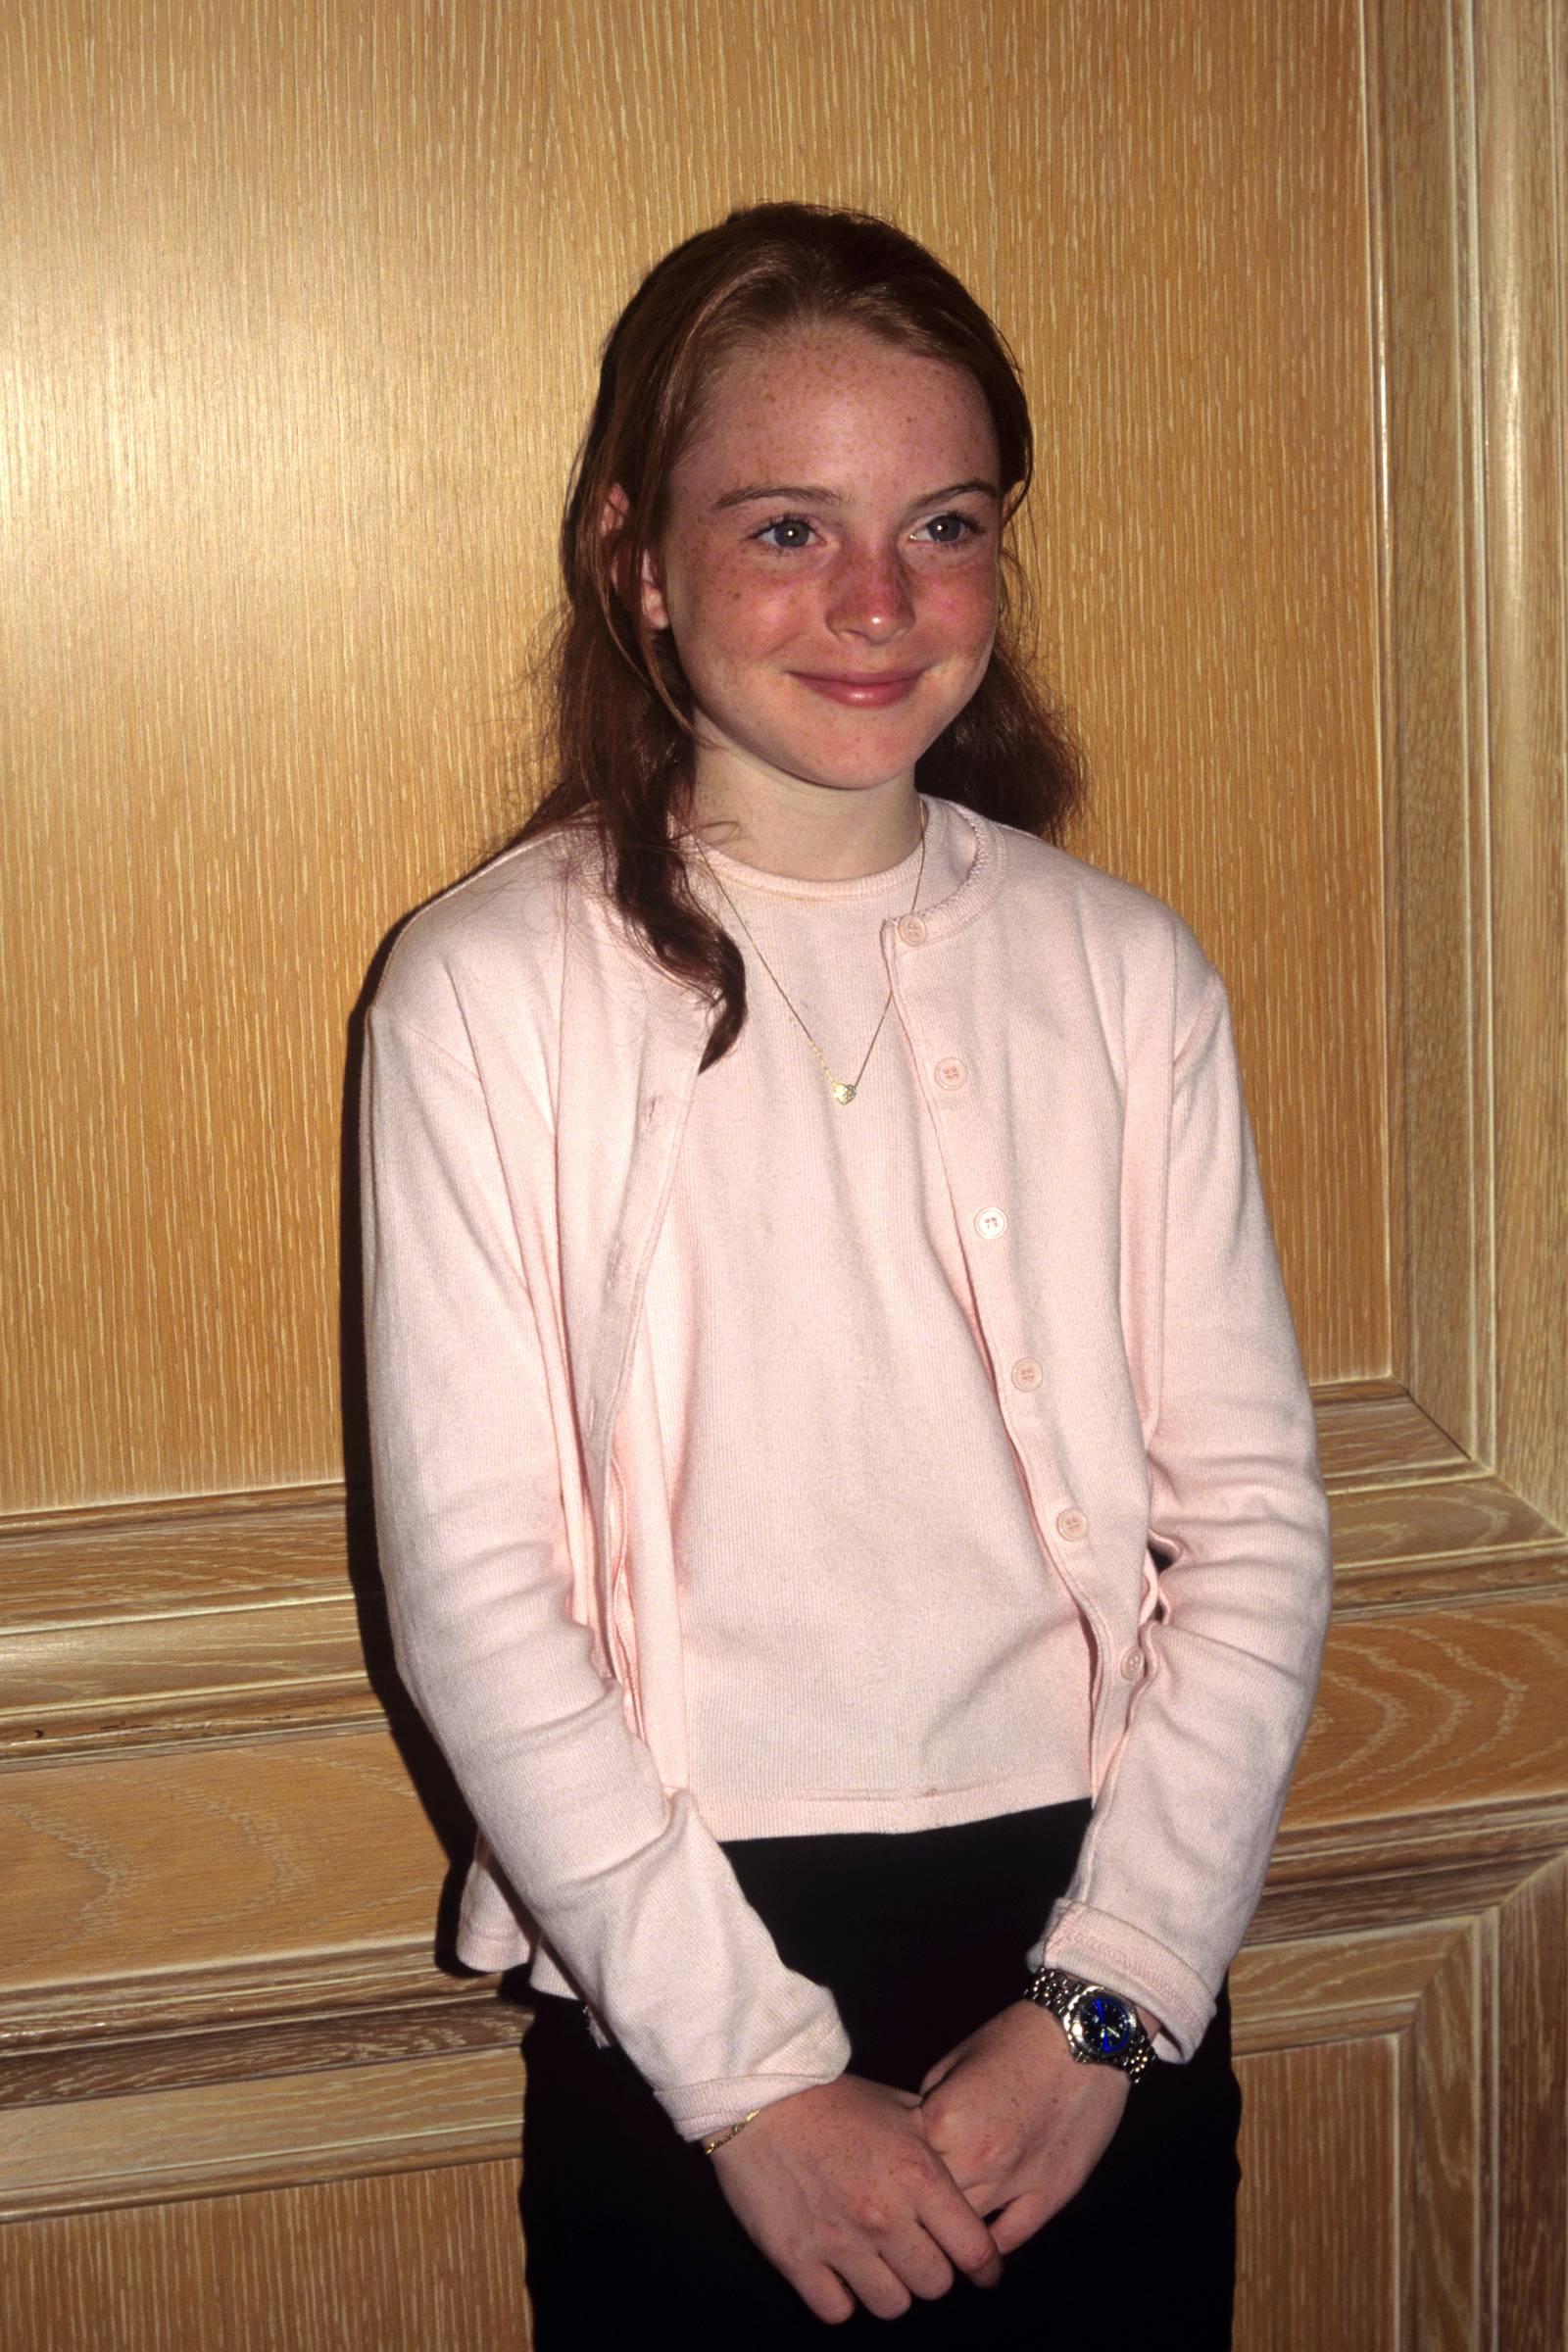 Lindsay Lohan, in a light pink top and cardigan, attends a Los Angeles press conference in January 1999. PA